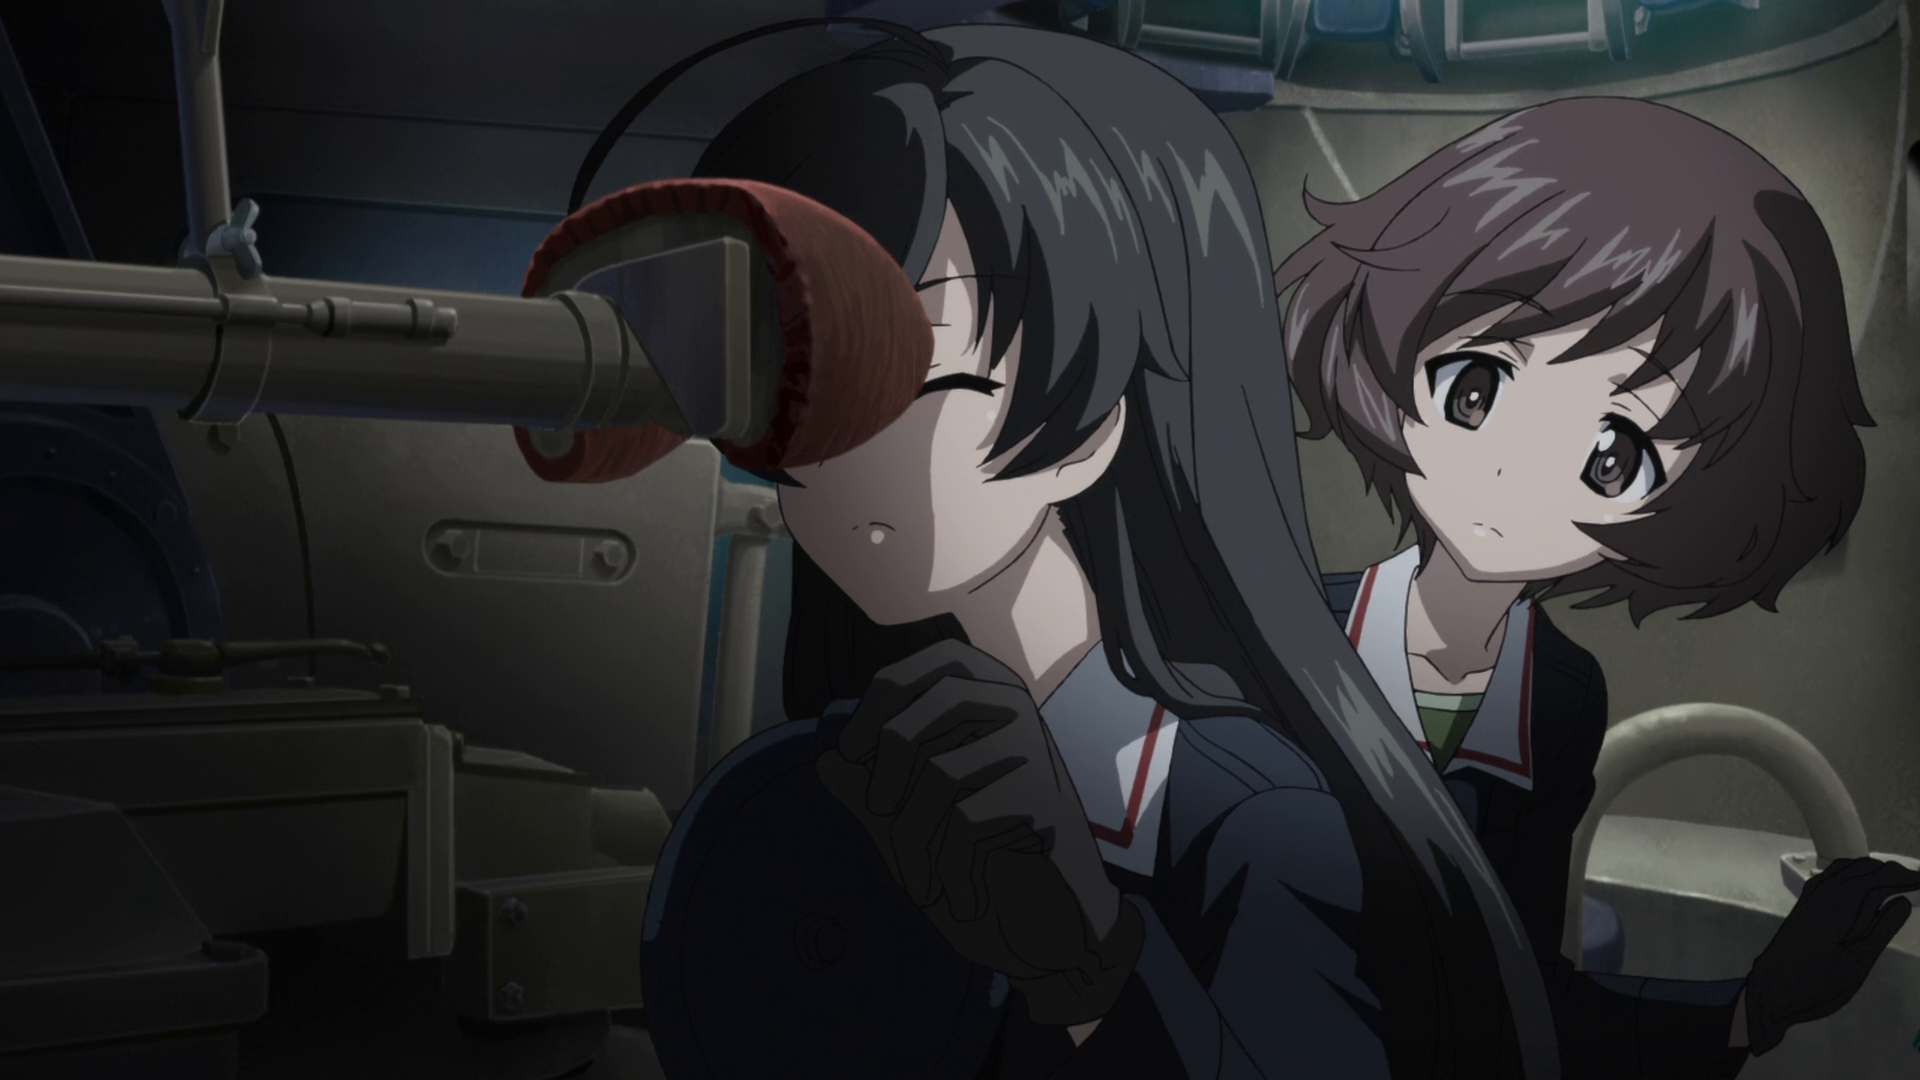 Two characters in Girls und Panzer are looking something worriedly.